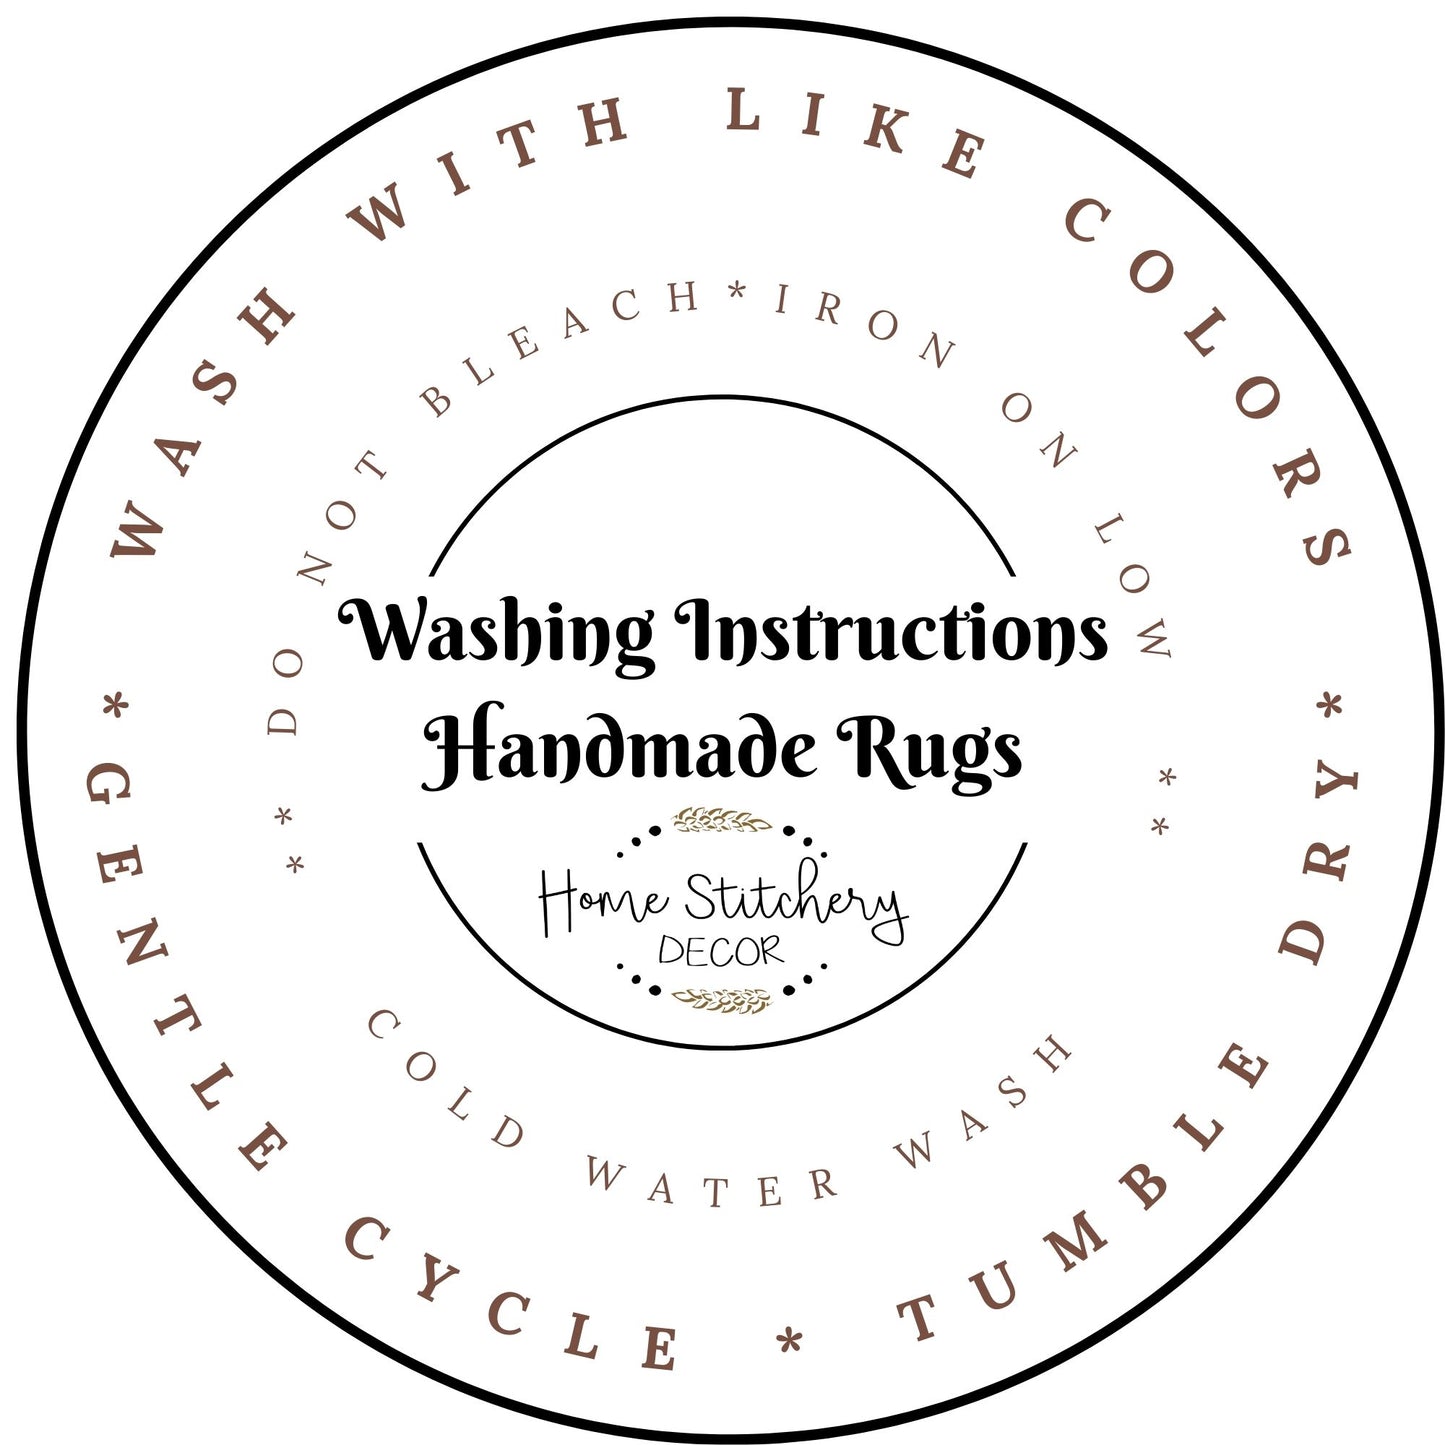 Washing Instructions for Handmade Rugs by Home Stitchery Decor.  Wash with like colors, do not bleach, safe to iron.  Tumble dry on low or hang to dry.  Shop the huge selection of handmade rugs by Home Stitchery Decor. Handmade in Canada! Cotton Rugs